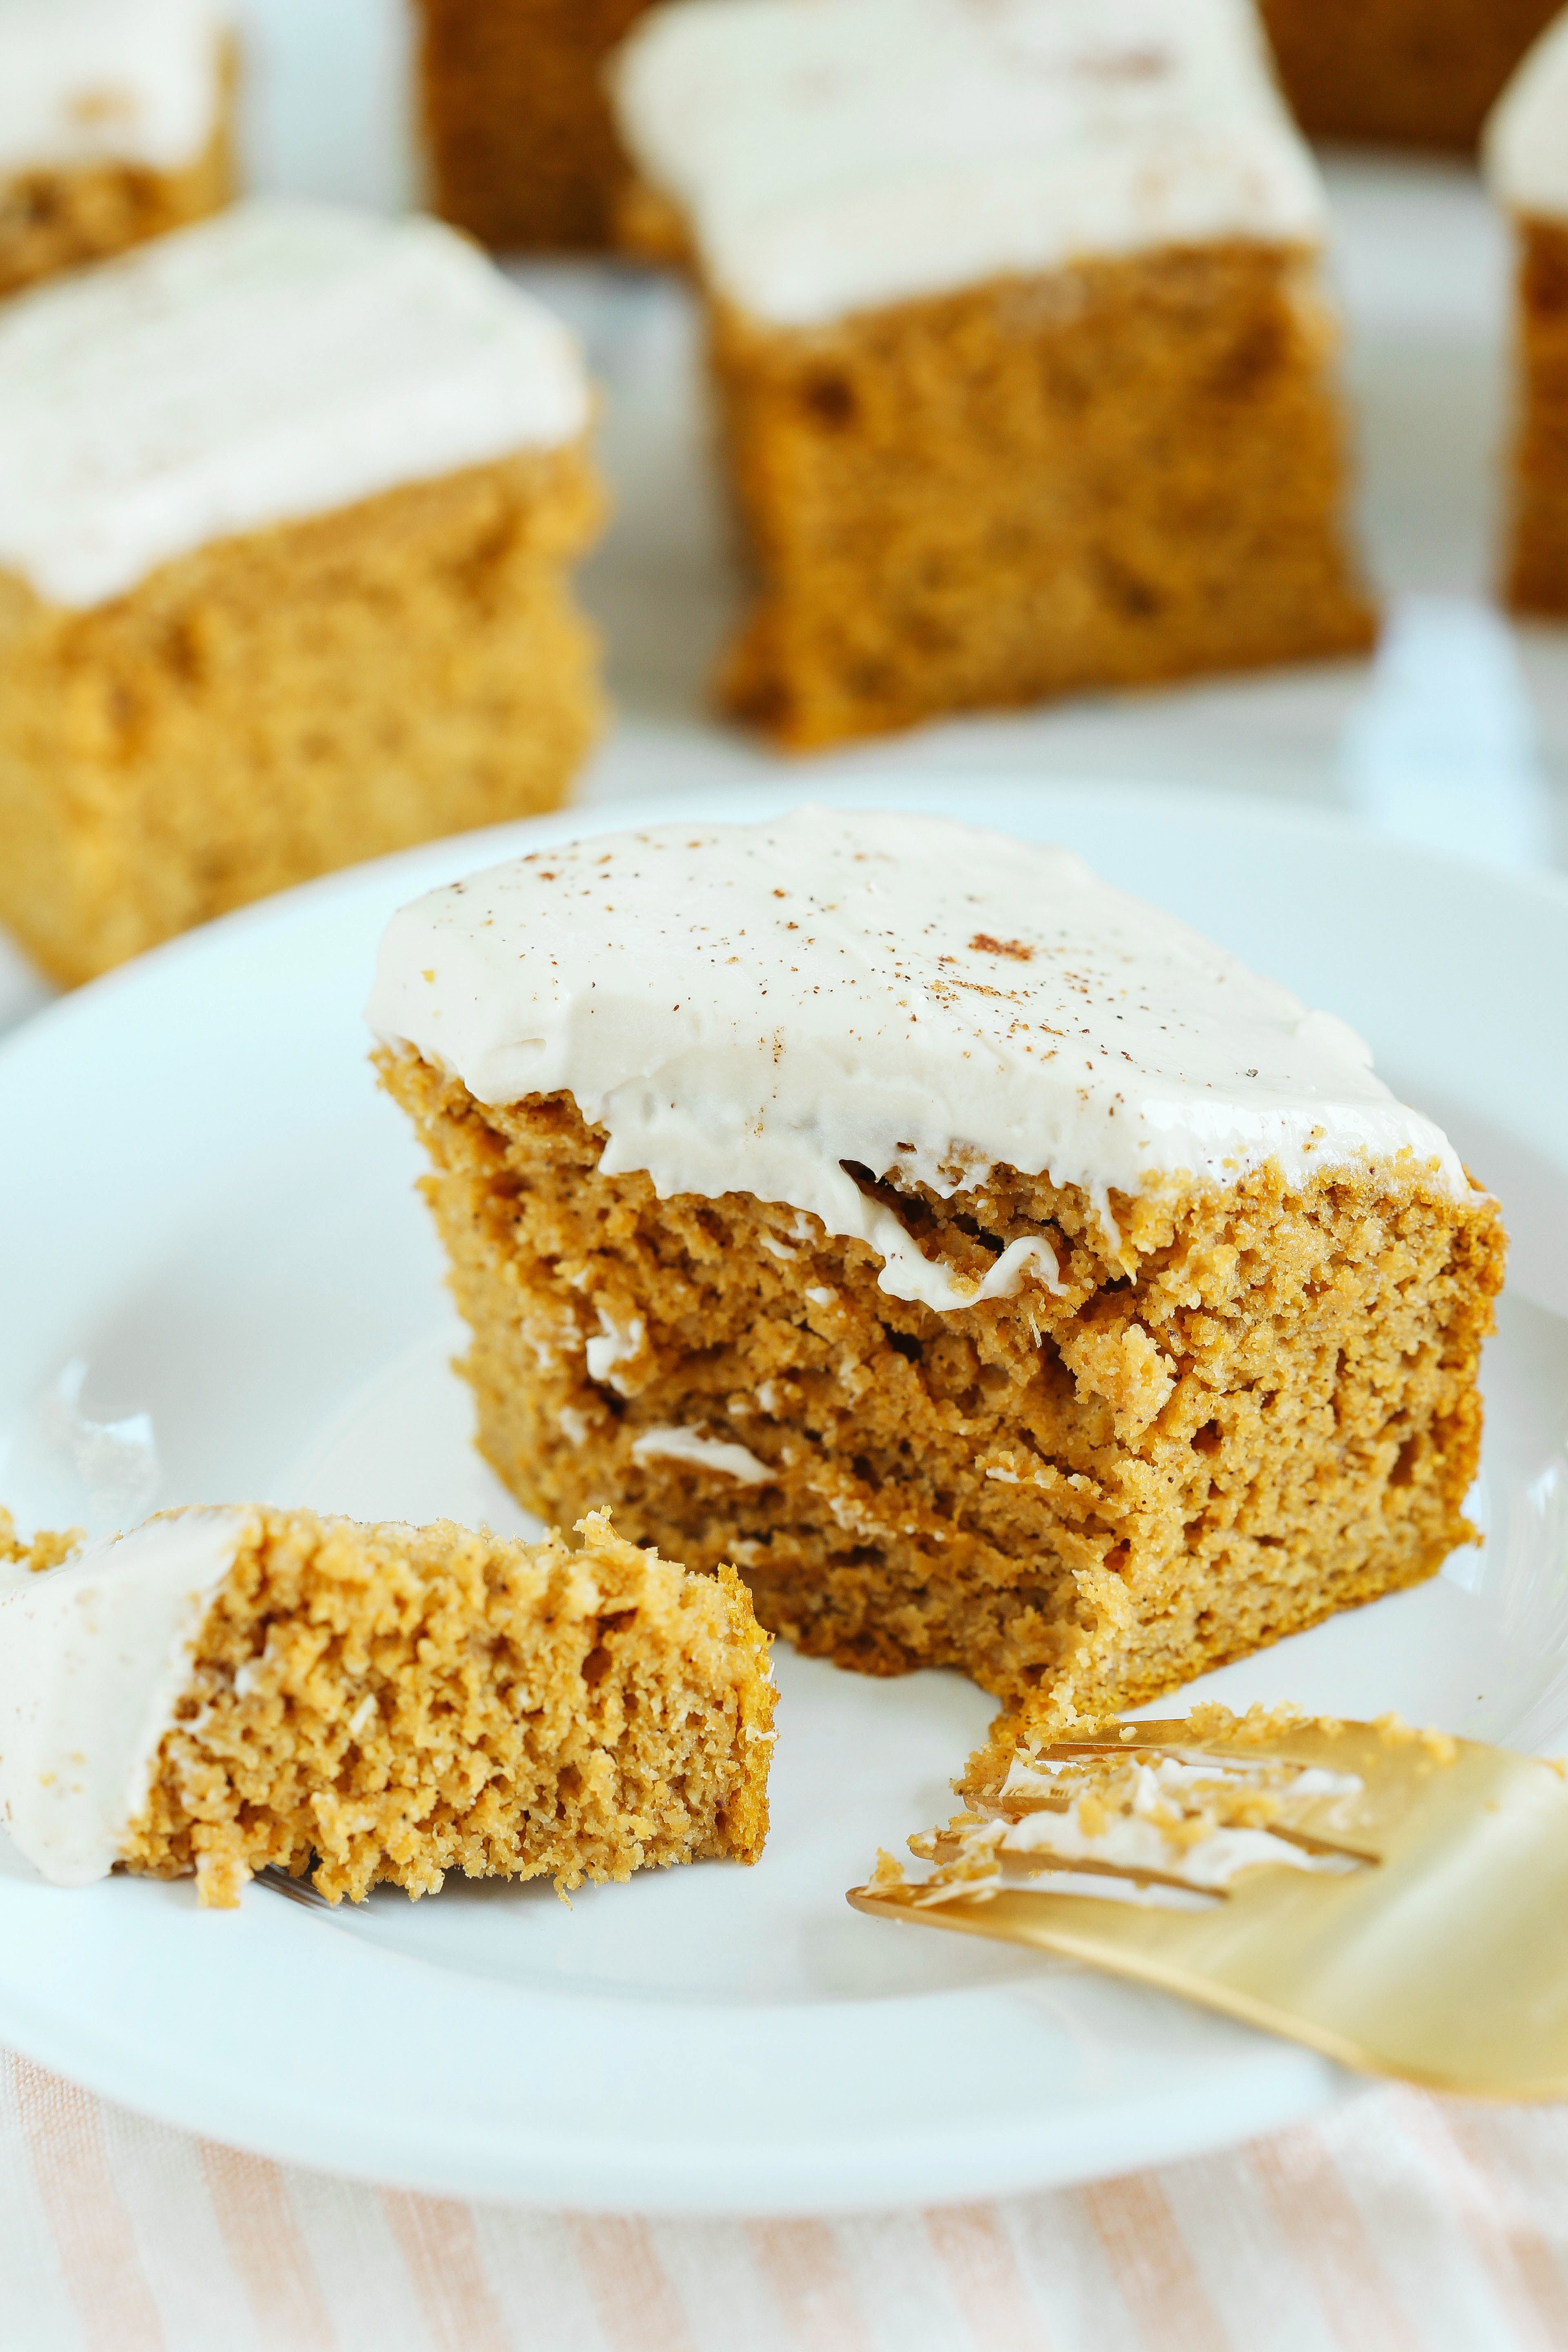 Kick off the fall season with these Healthier Pumpkin Bars with Cream Cheese Frosting that are moist, delicious and taste just like cake, but without any butter or refined sugar!